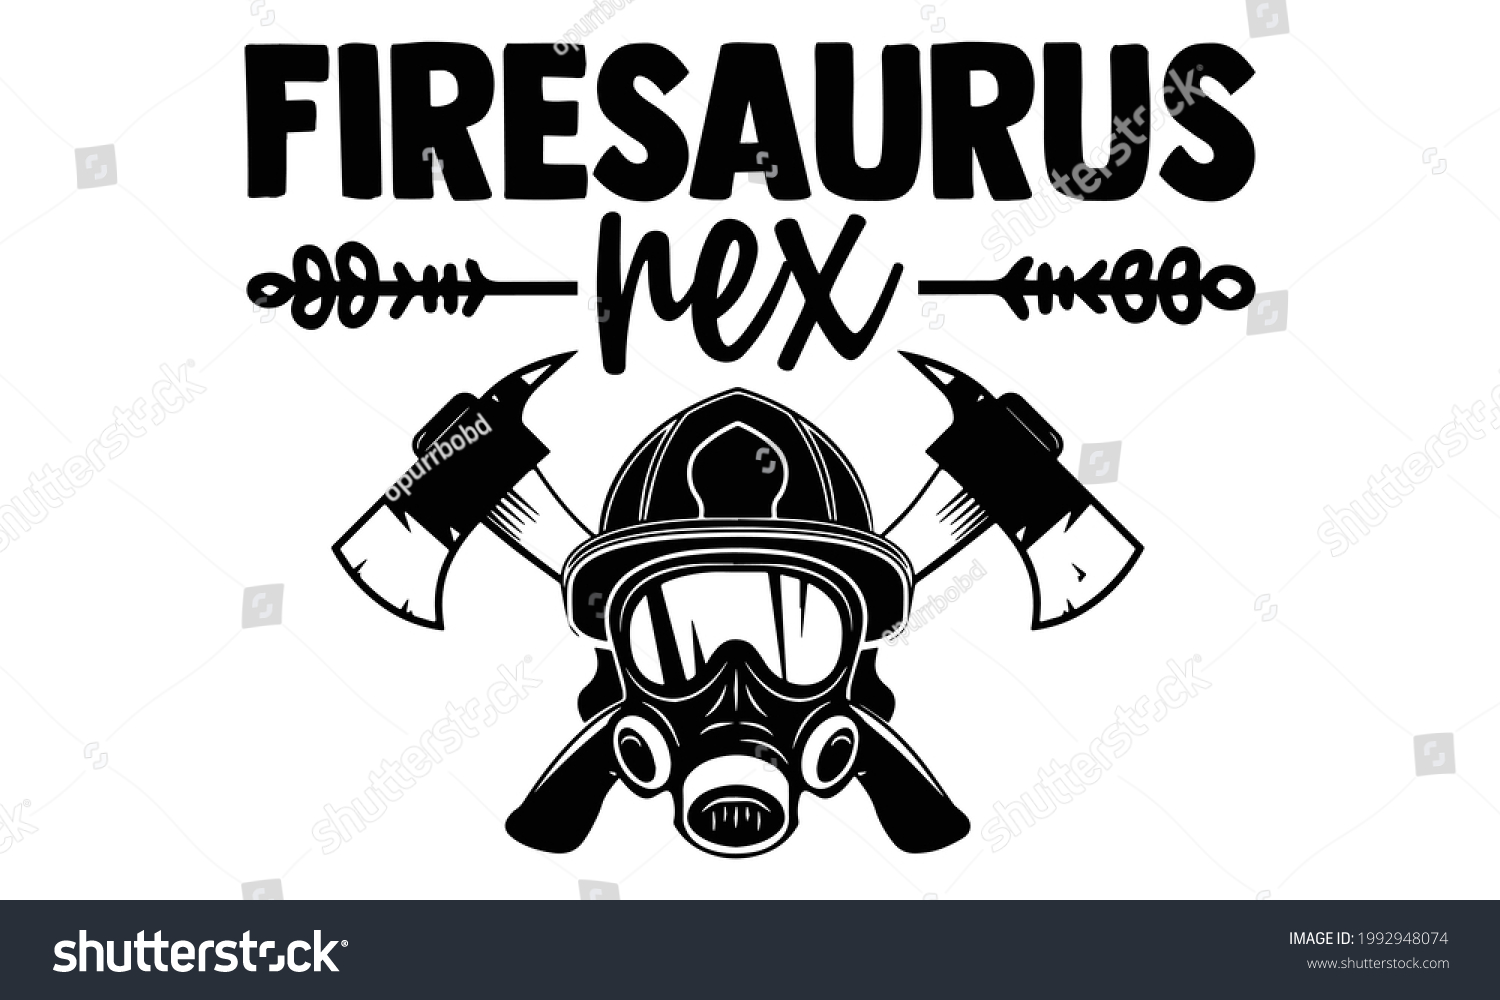 SVG of Firesaurus rex- Firefighter t shirts design, Hand drawn lettering phrase, Calligraphy t shirt design, Isolated on white background, svg Files for Cutting Cricut and Silhouette, EPS 10 svg